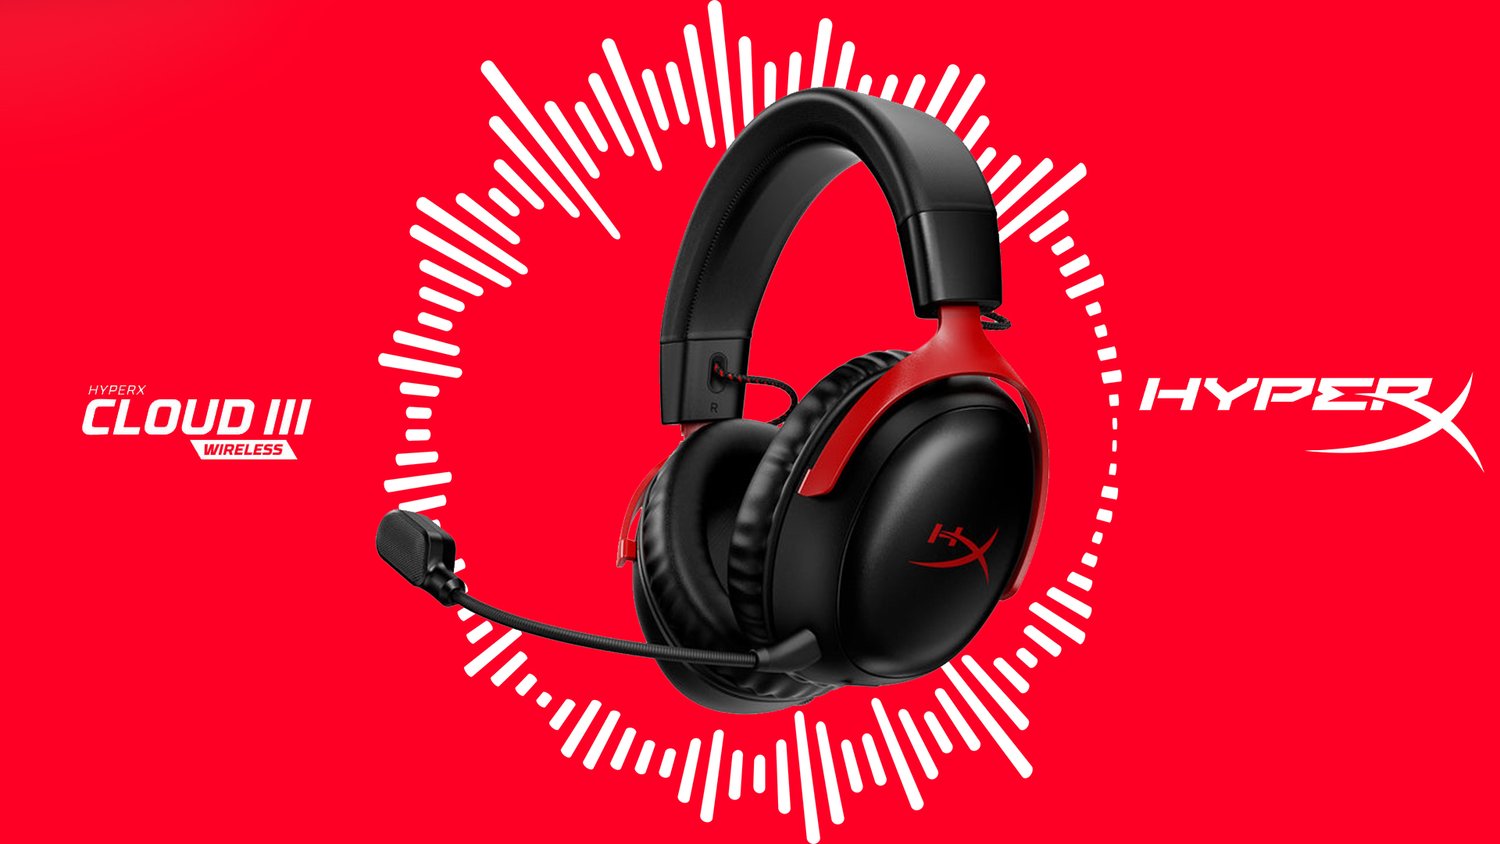 HyperX have announced the Cloud III Wireless and will launch it here in  September — Maxi-Geek